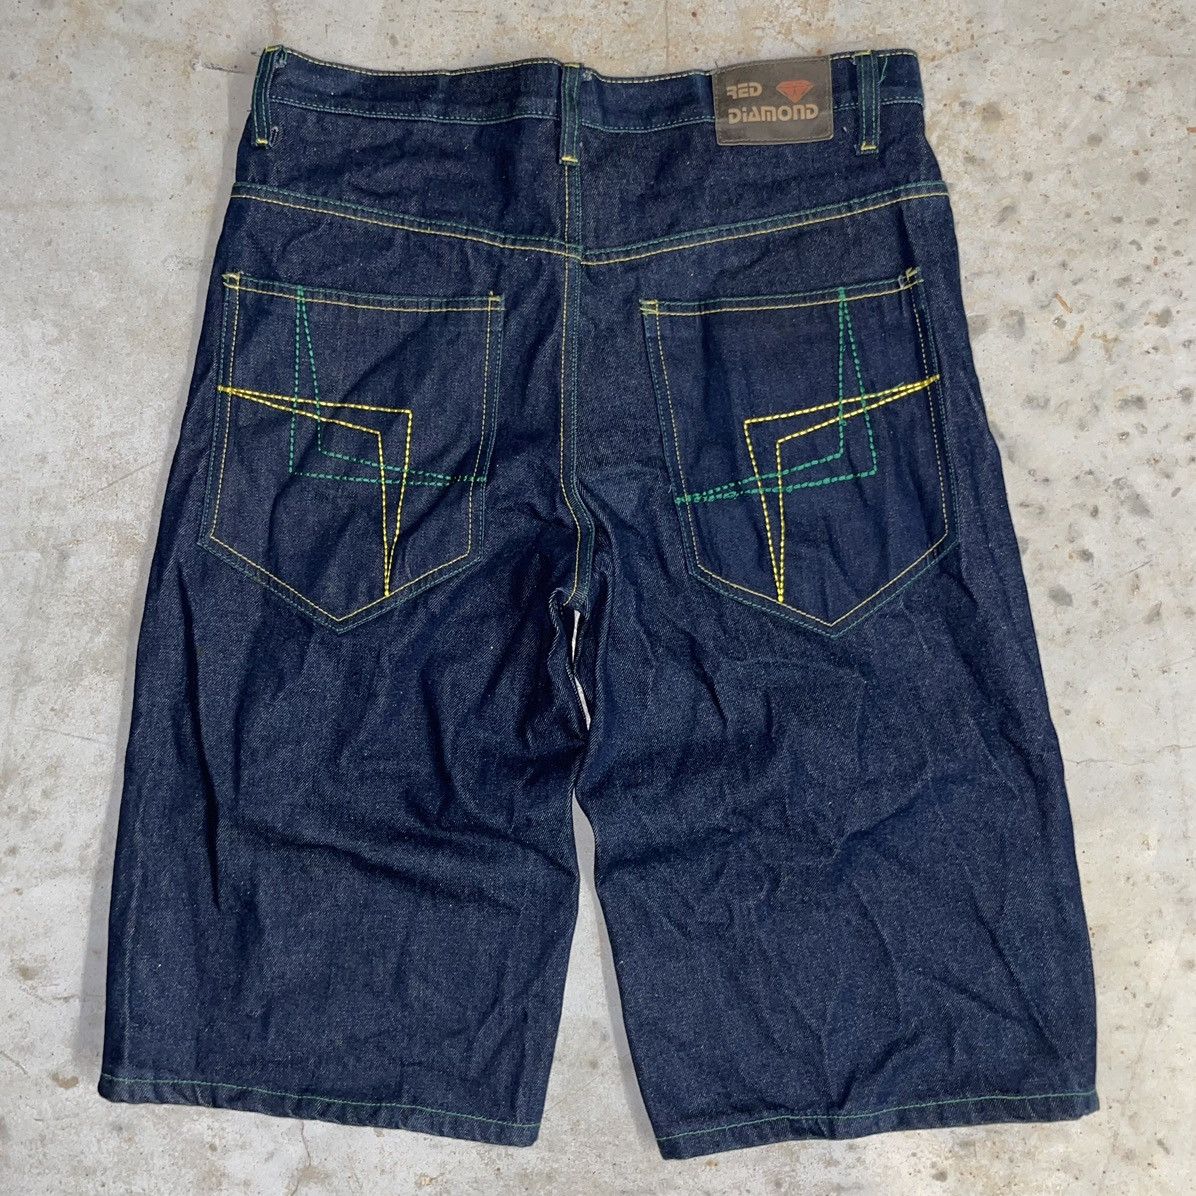 Southpole Crazy Y2K Southpole Style Baggy Jorts Opium Dark Jean Shorts ...